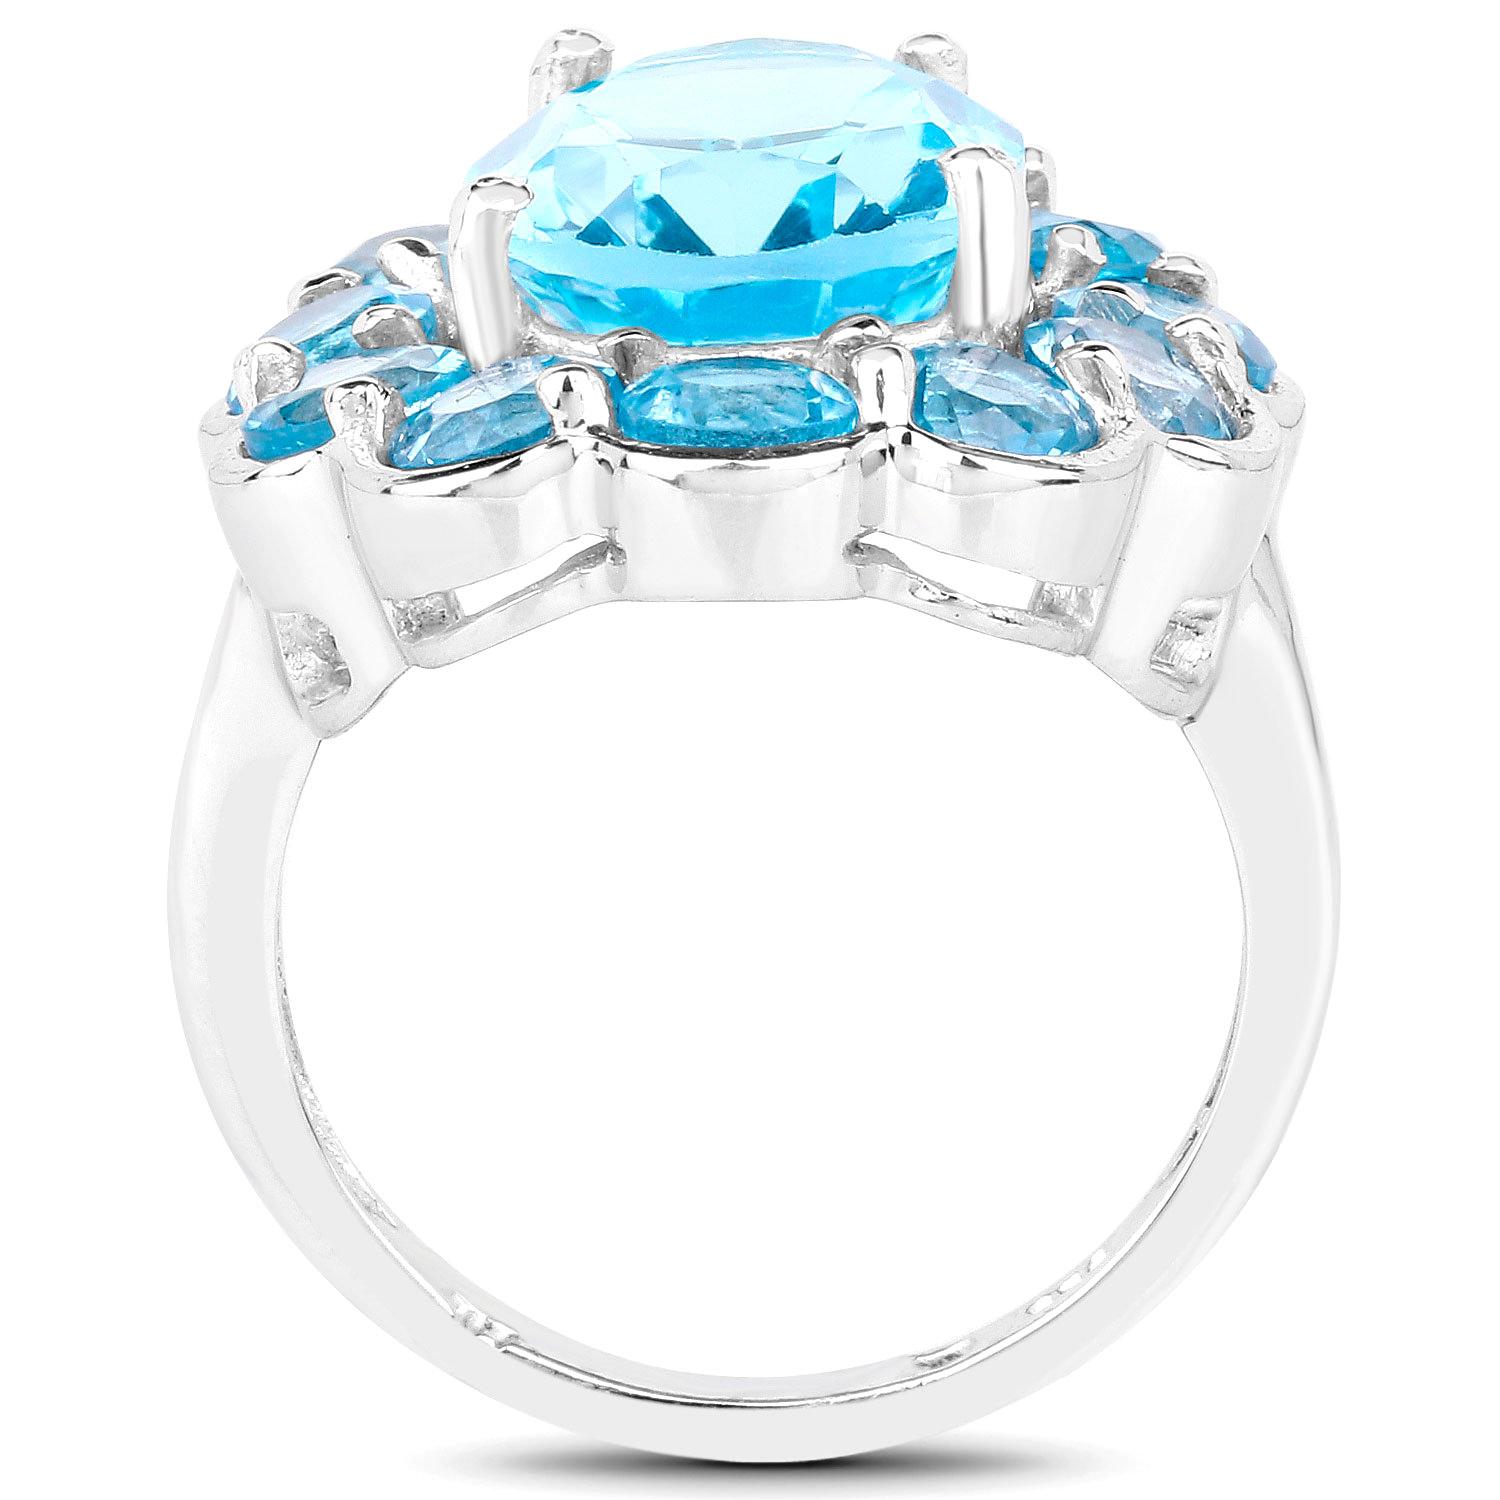 Swiss Blue Topaz Flower Cocktail Ring 8.8 Carats Sterling Silver In Excellent Condition For Sale In Laguna Niguel, CA